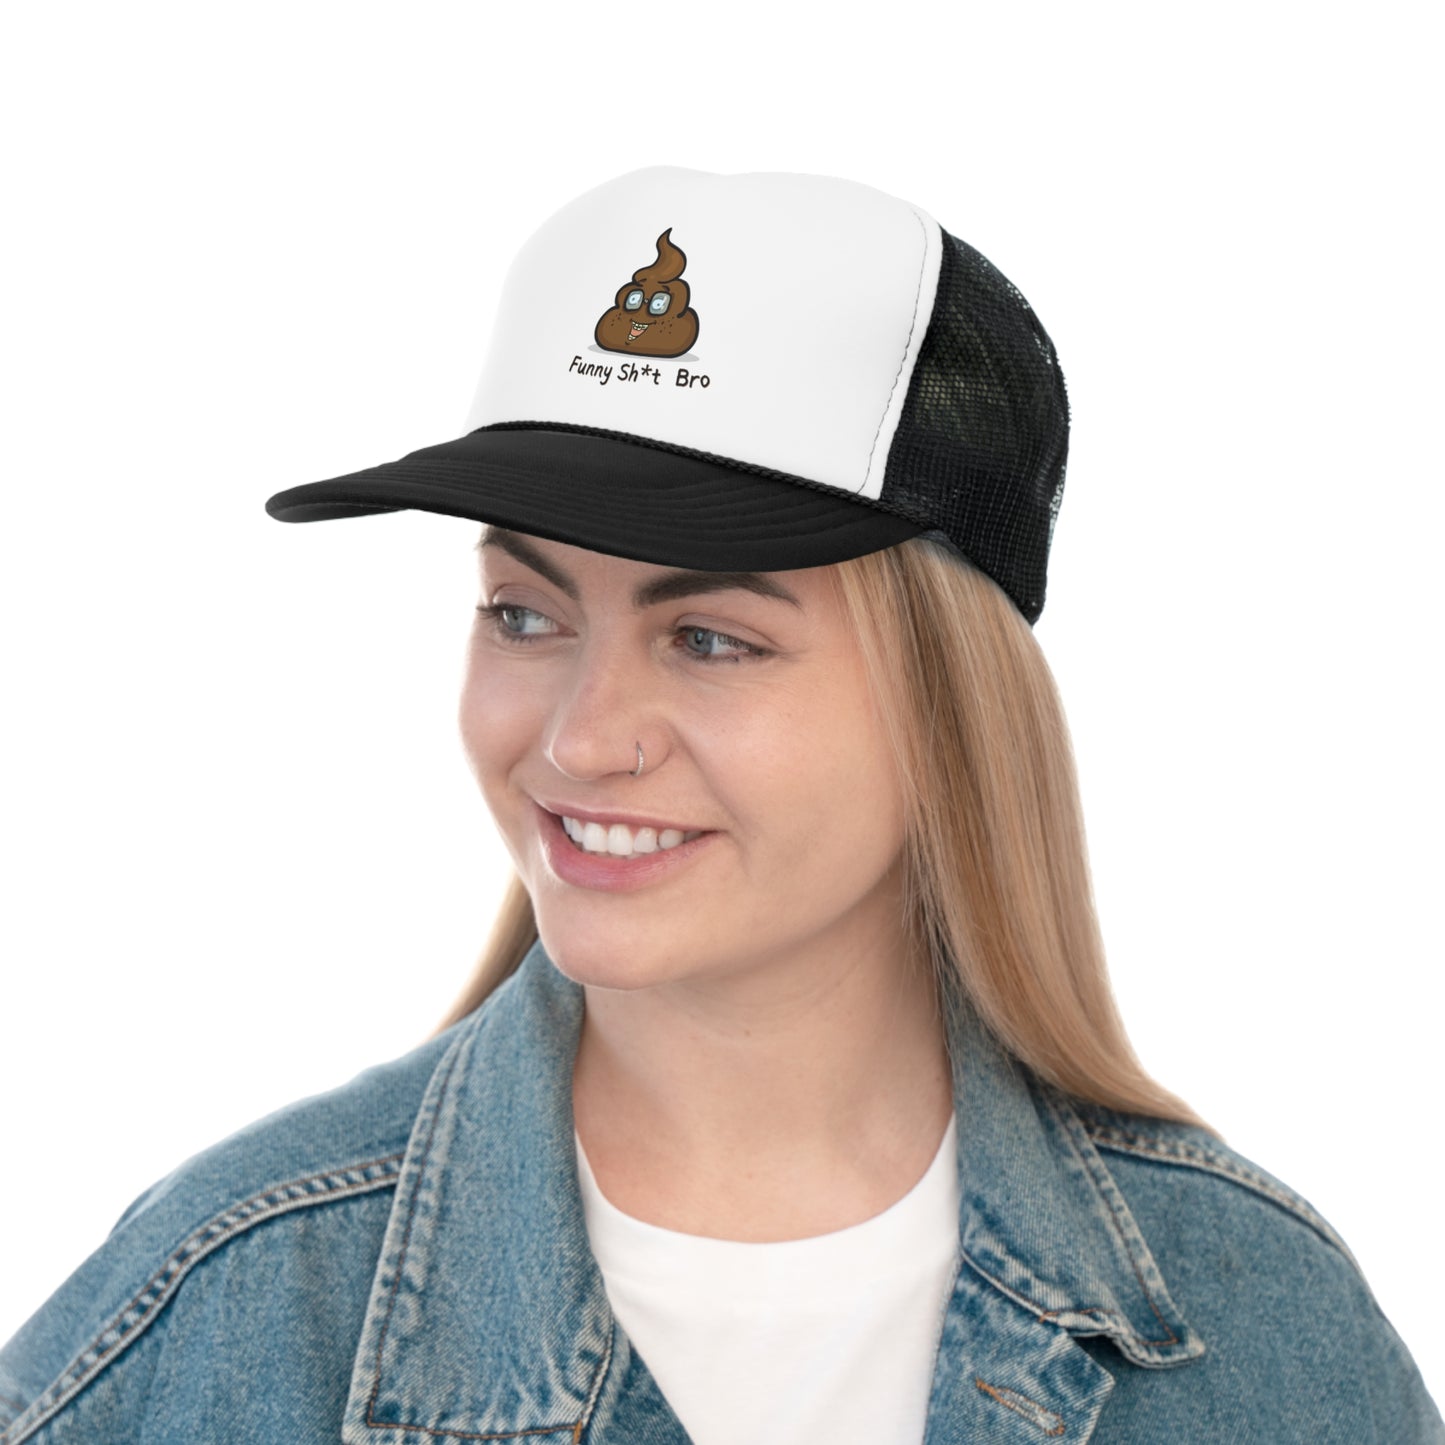 "Funny Sh*t Bro Poop Emoji" Hat - Weave Got Gifts - Unique Gifts You Won’t Find Anywhere Else!